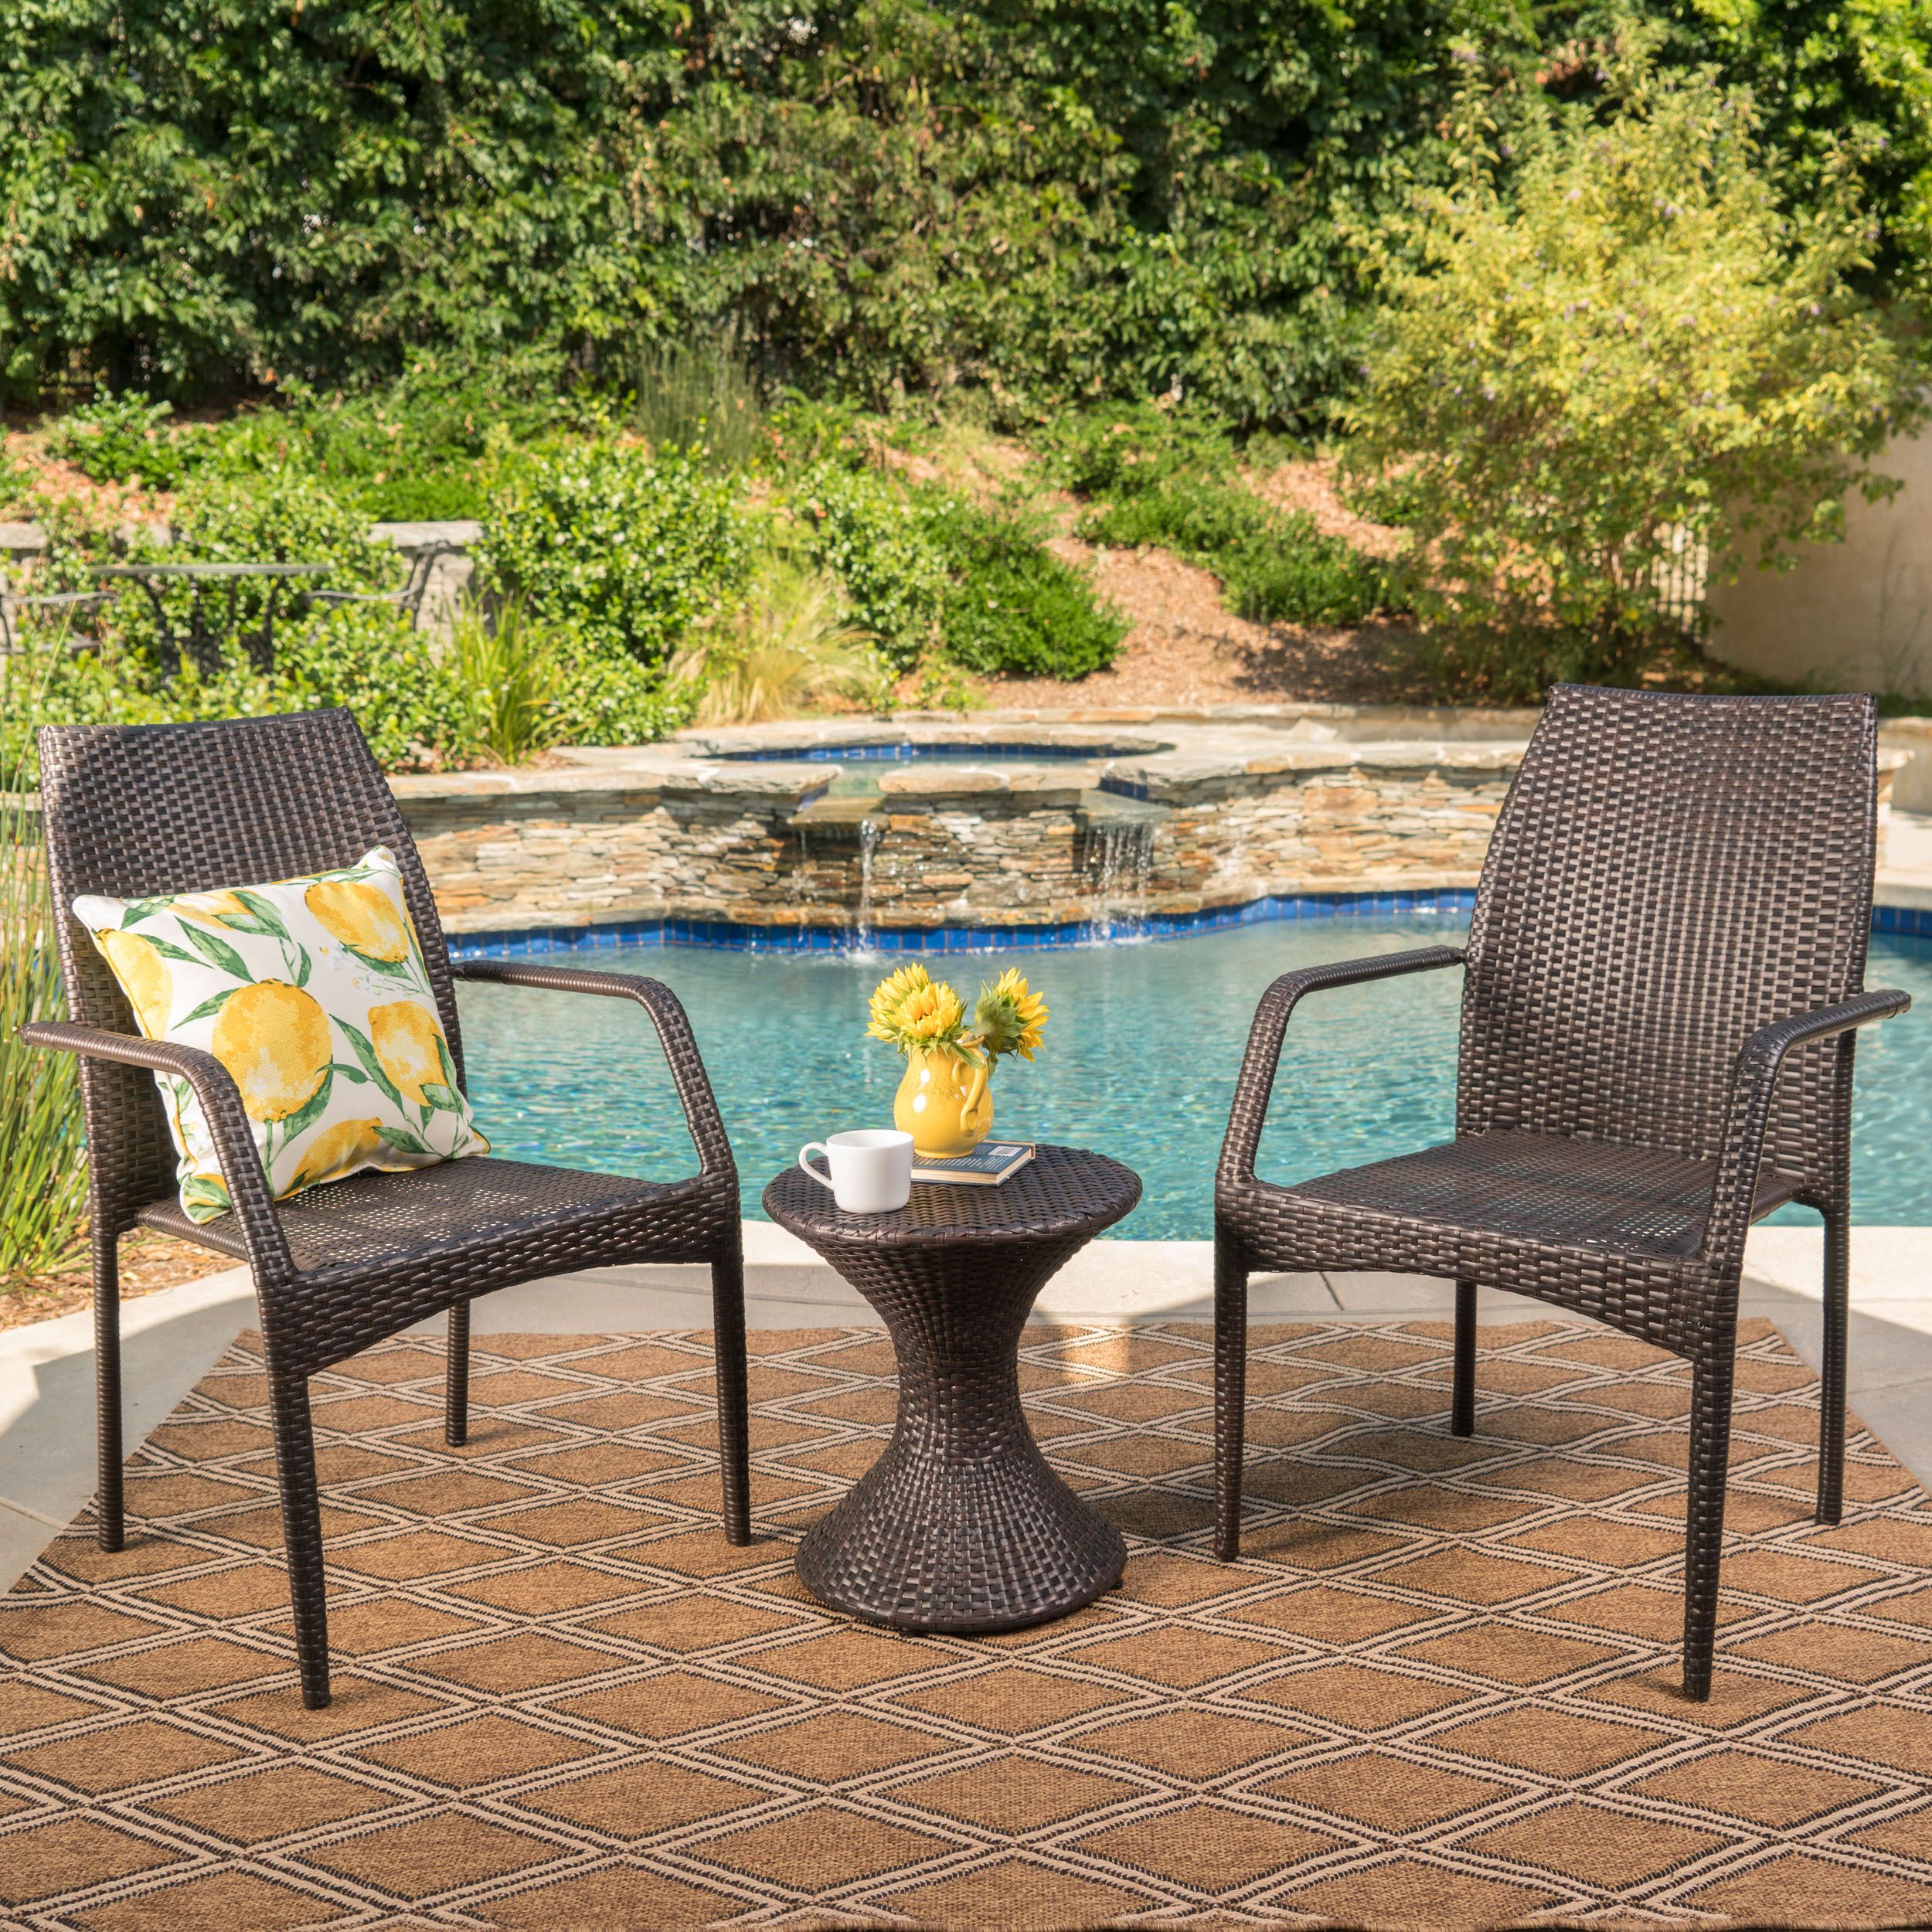 Landsbury Outdoor 3 Piece Wicker Chat Set With Stacking Chairs And In 3 Piece Outdoor Table And Chair Sets (View 1 of 15)